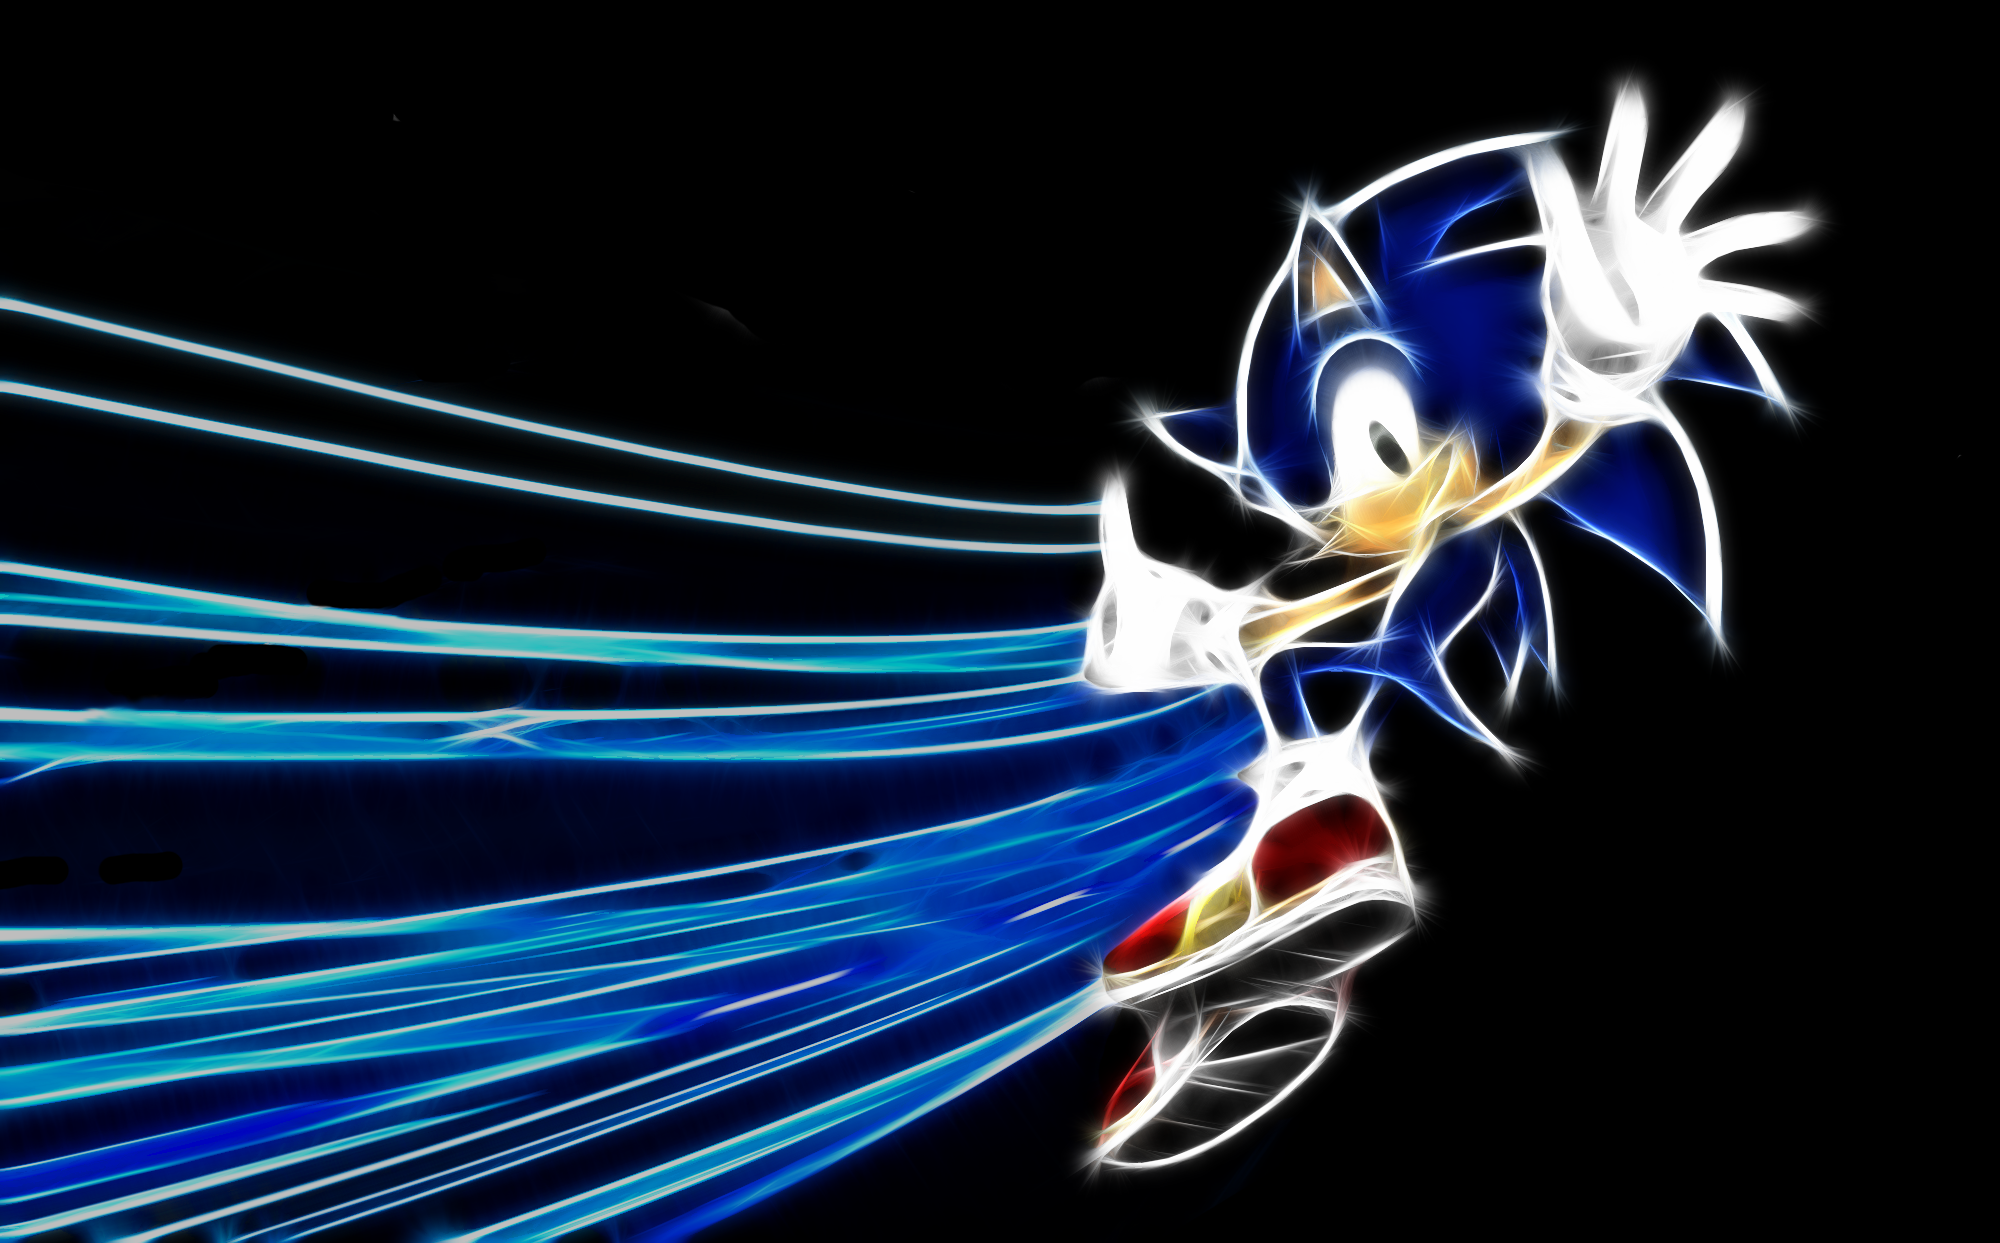 HD sonic wallpapers